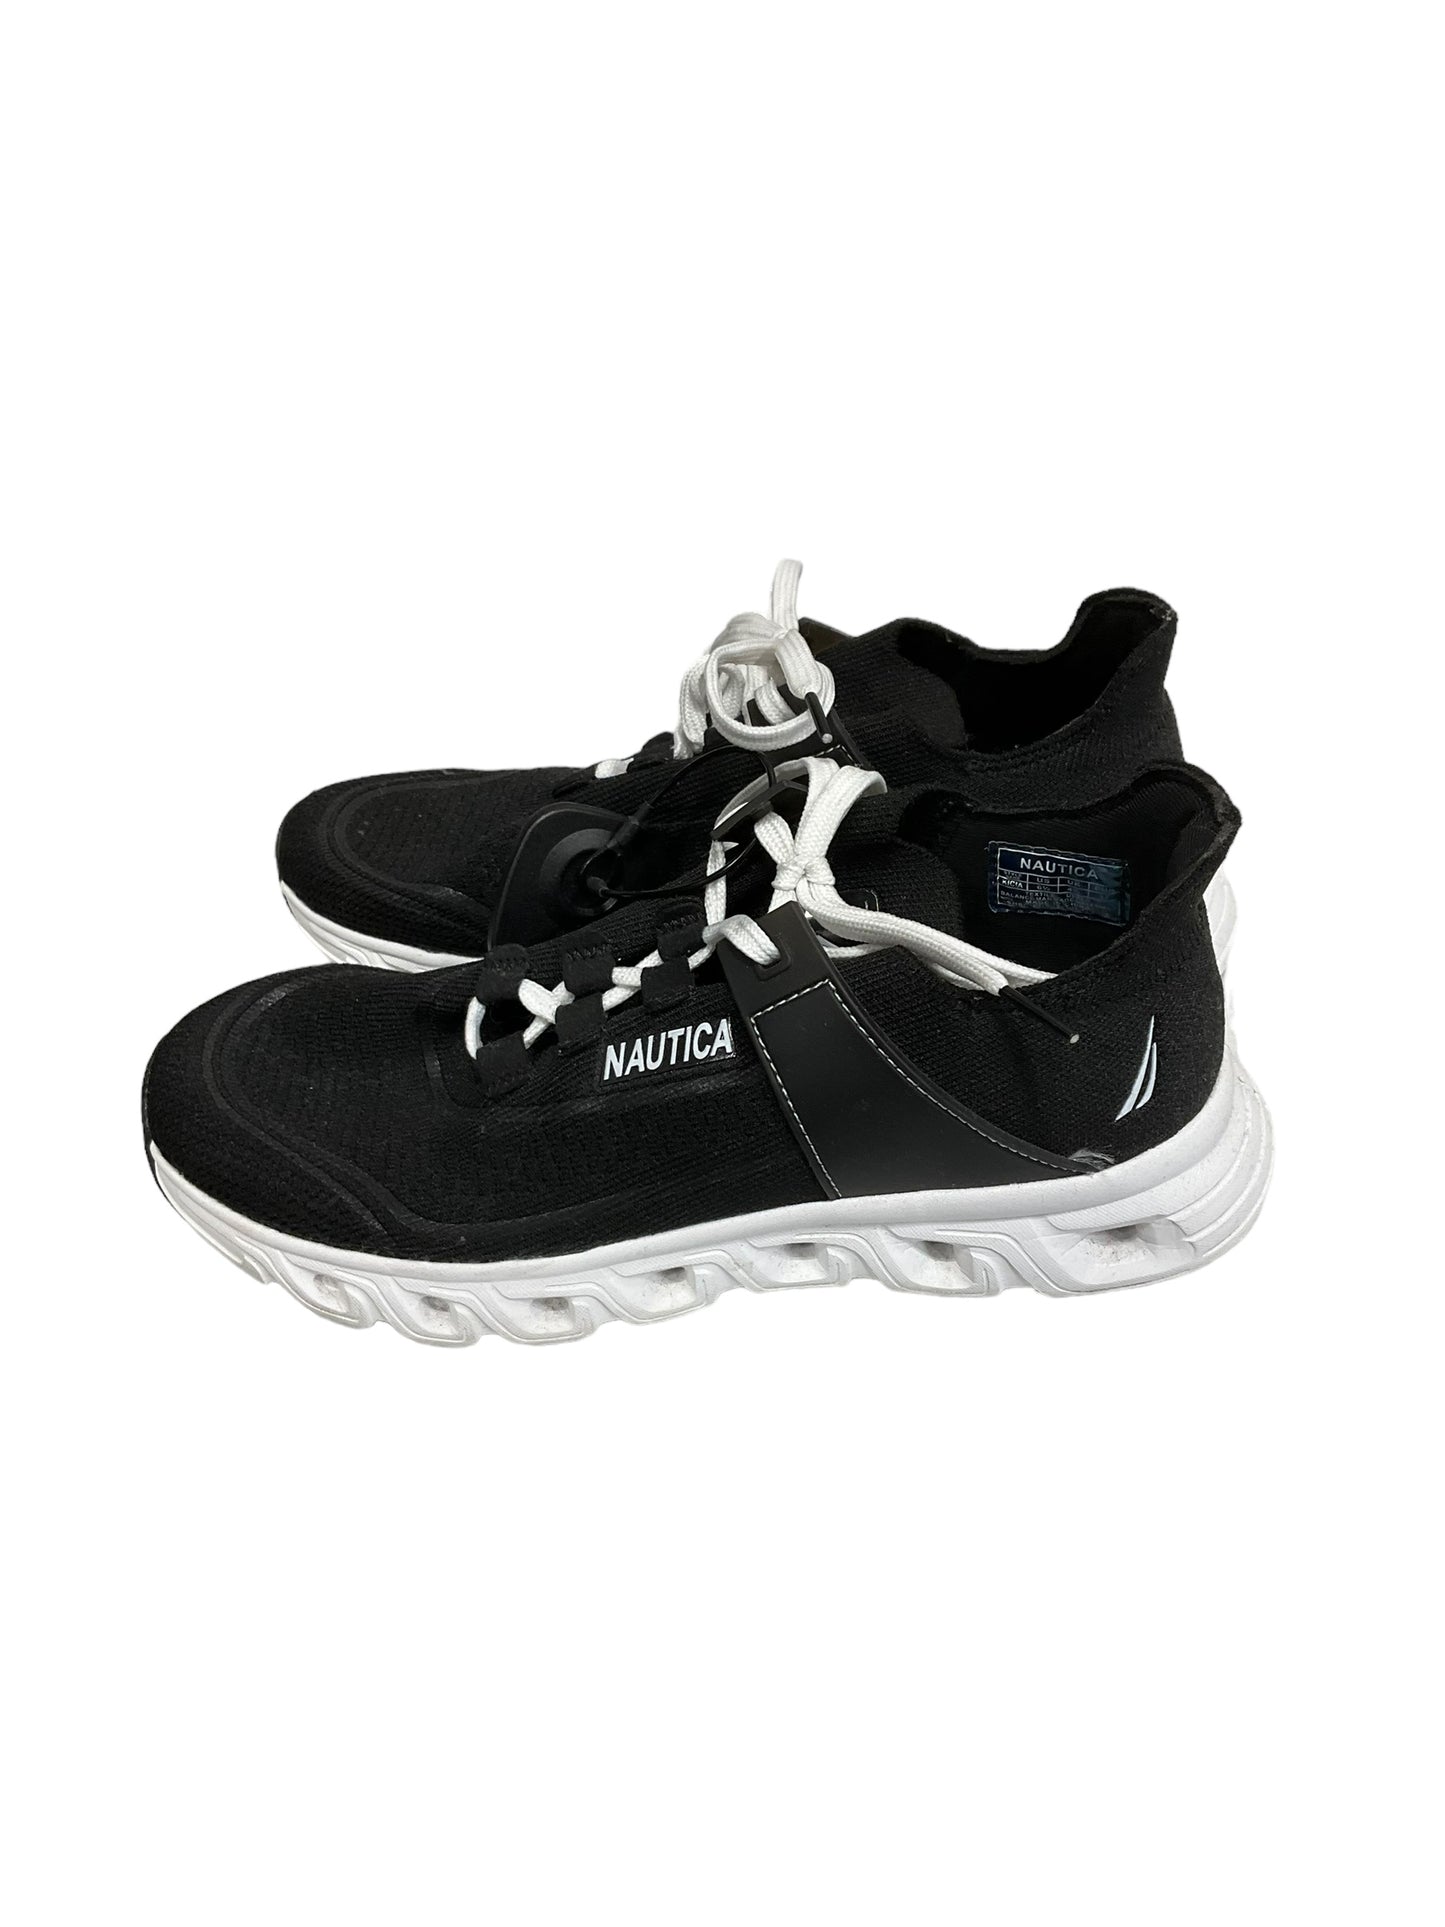 Shoes Athletic By Nautica  Size: 6.5